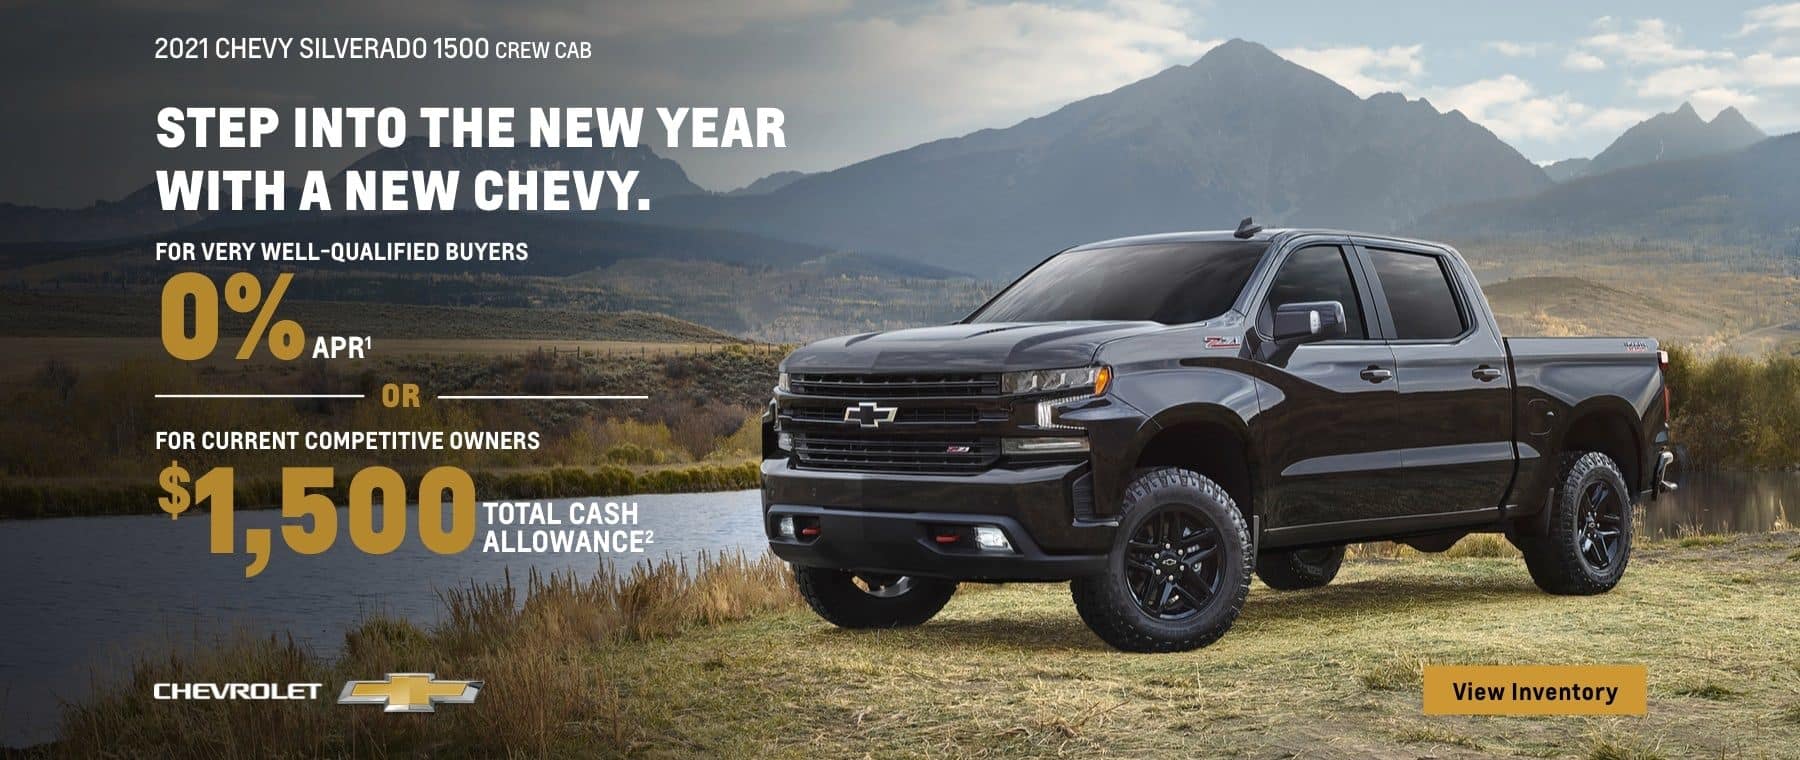 2021 Chevy Silverado 1500 Crew Cab. Step into the new year with a new Chevy. For very well-qualified buyers 0% APR. Or, for current competitive owners $1,500 total cash allowance.